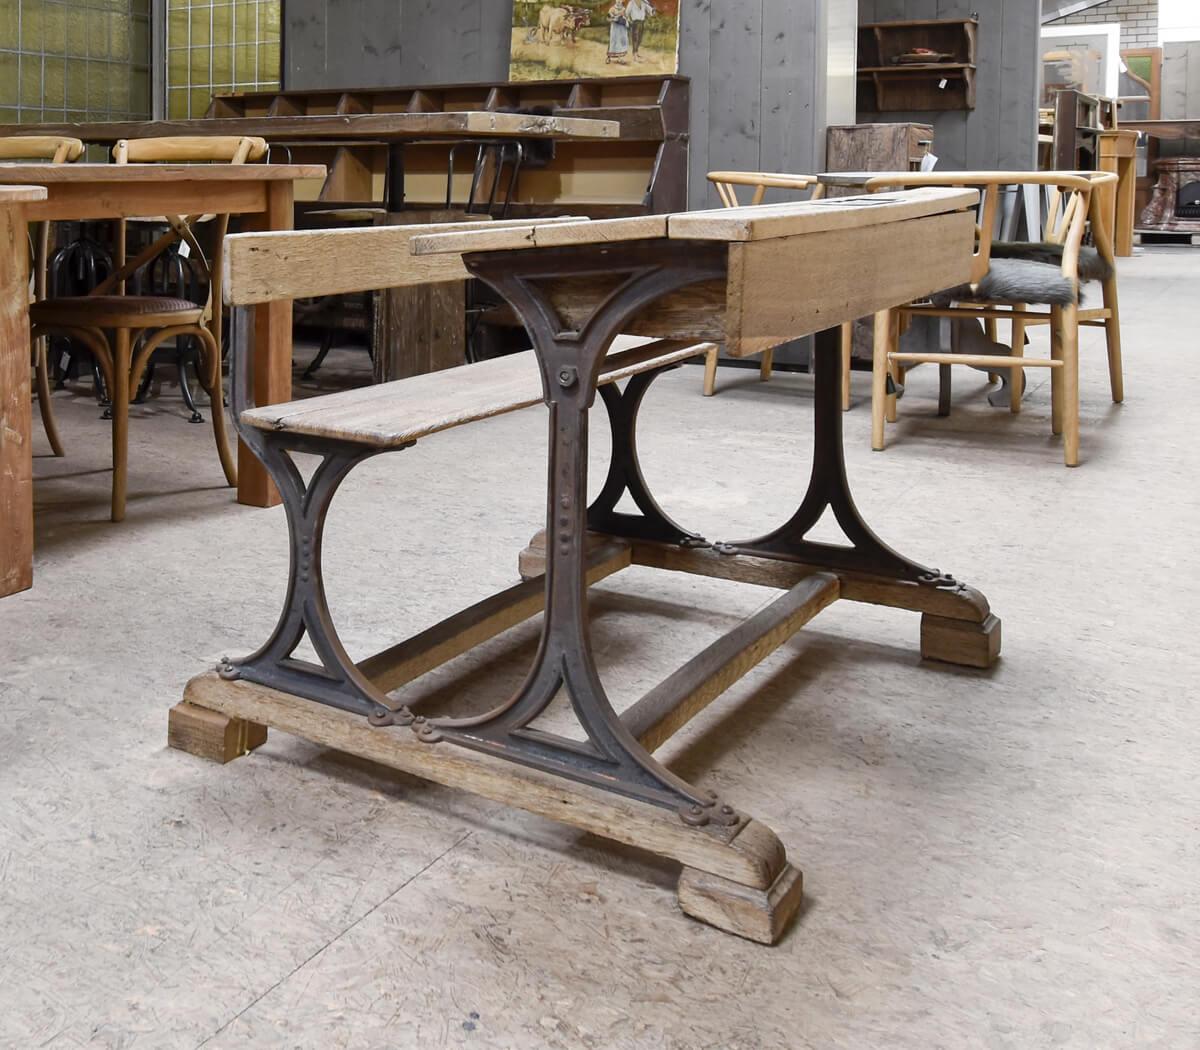 Beautiful school bench and table with cast iron frame from the 19th Century.
Recuperated out of France.